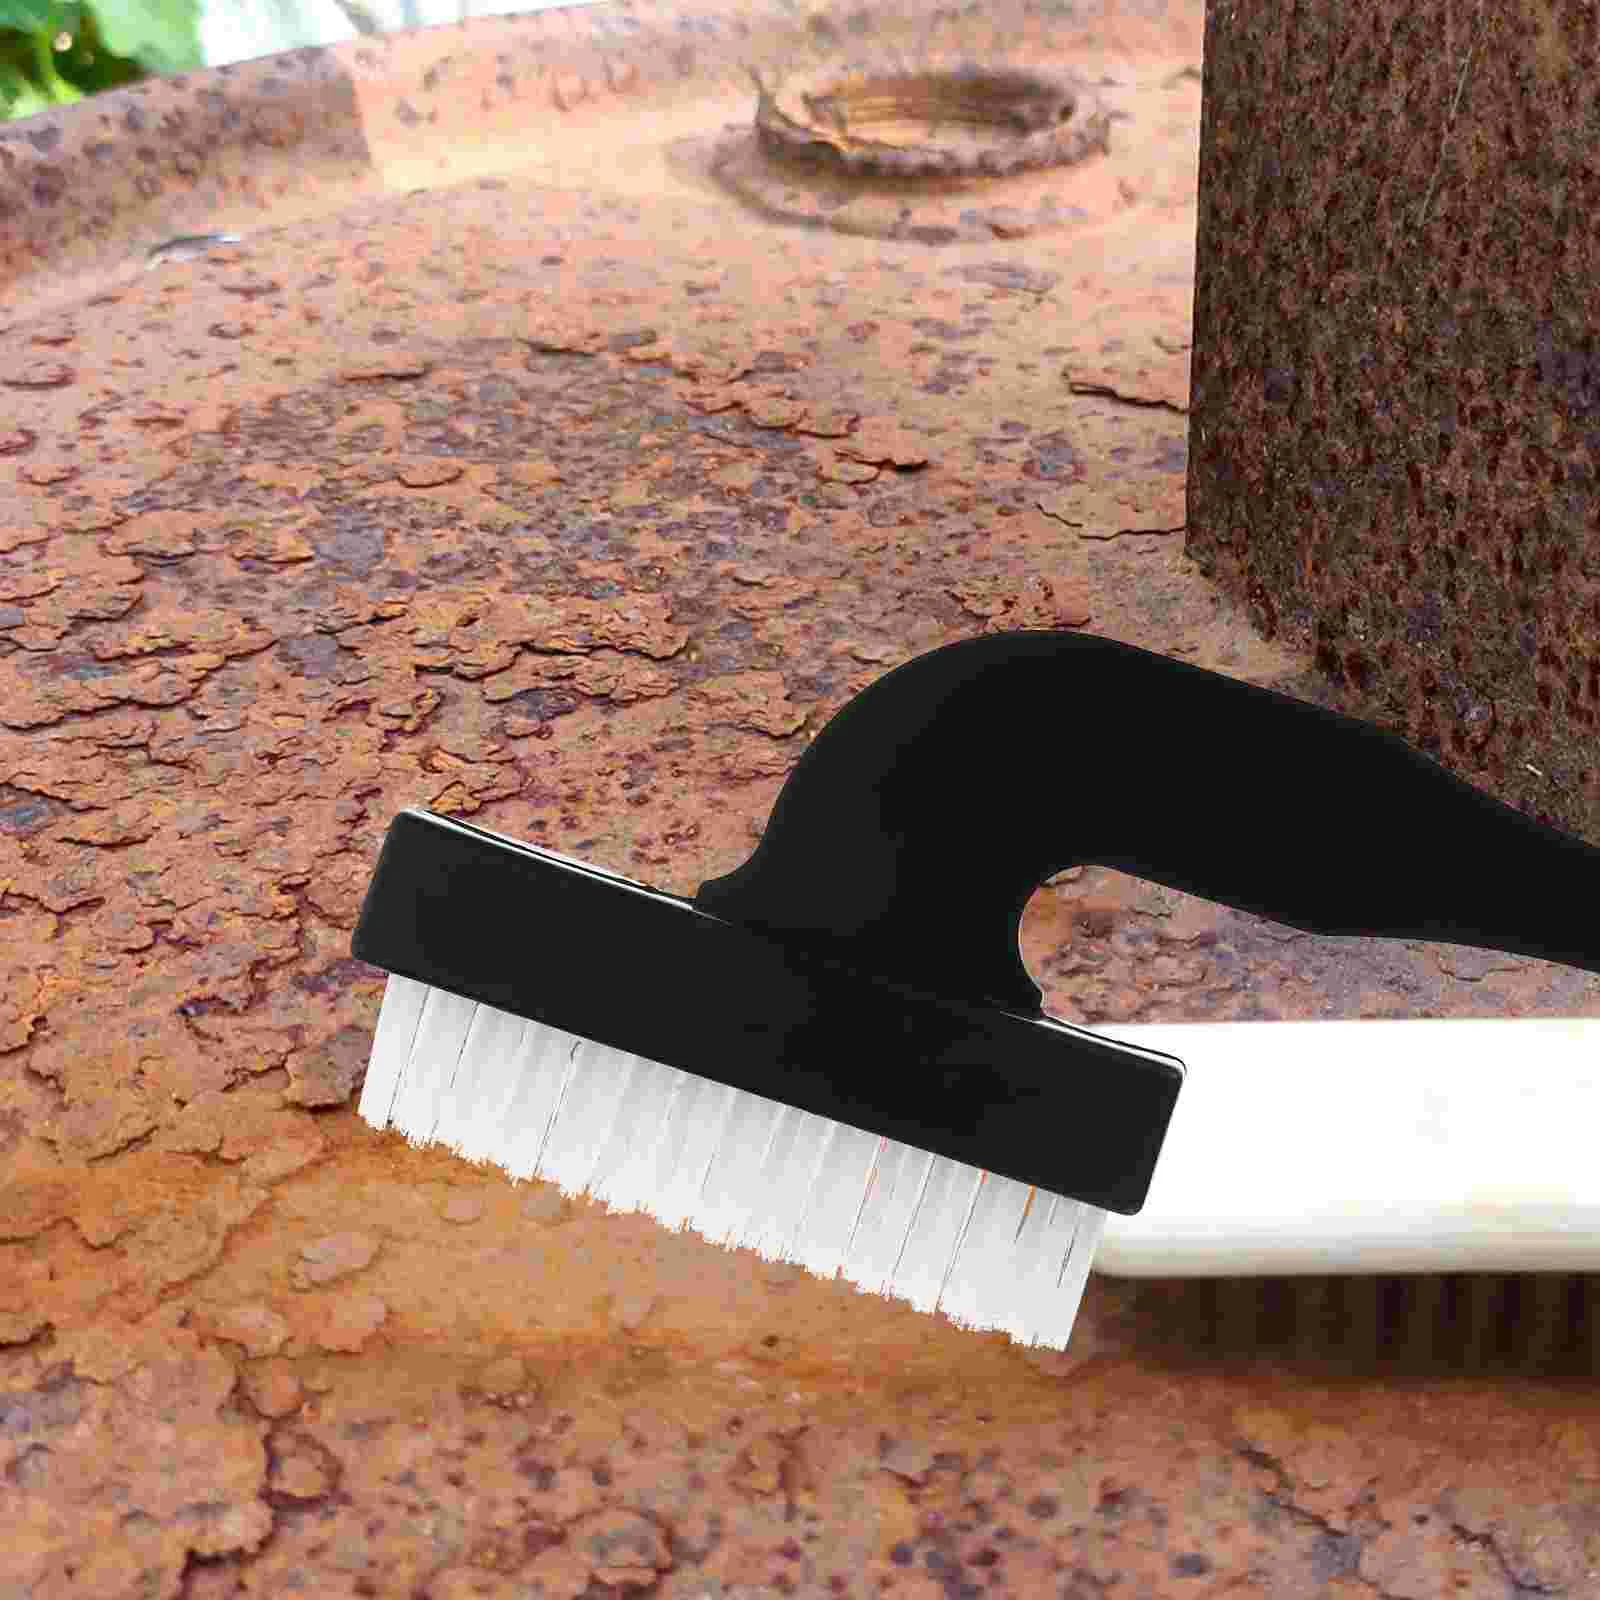 

Rust Removal Tool Removing Brush Saber Saw Remover Attachment Cleaning Brushes Nylon Reciprocating Blade Durable